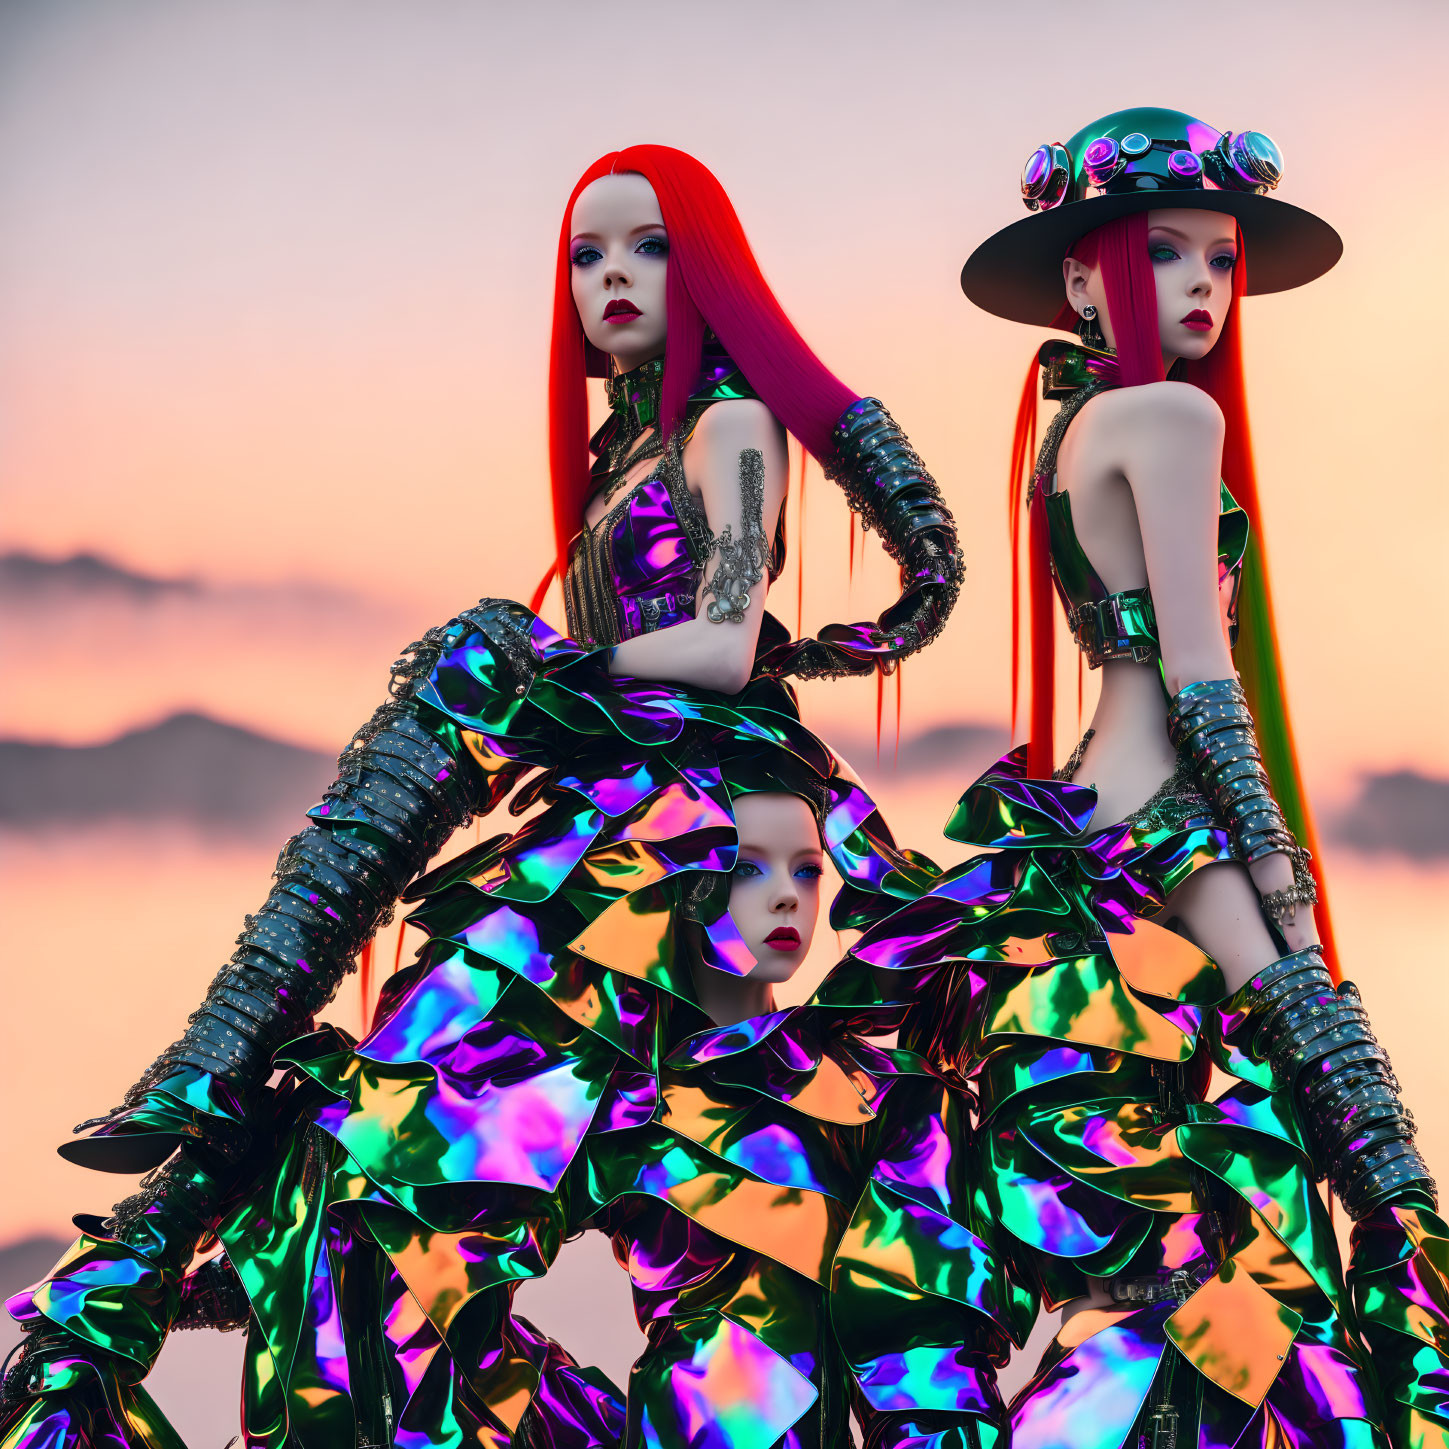 Three Red-Haired Female Figures in Futuristic Avant-Garde Outfits at Sunset